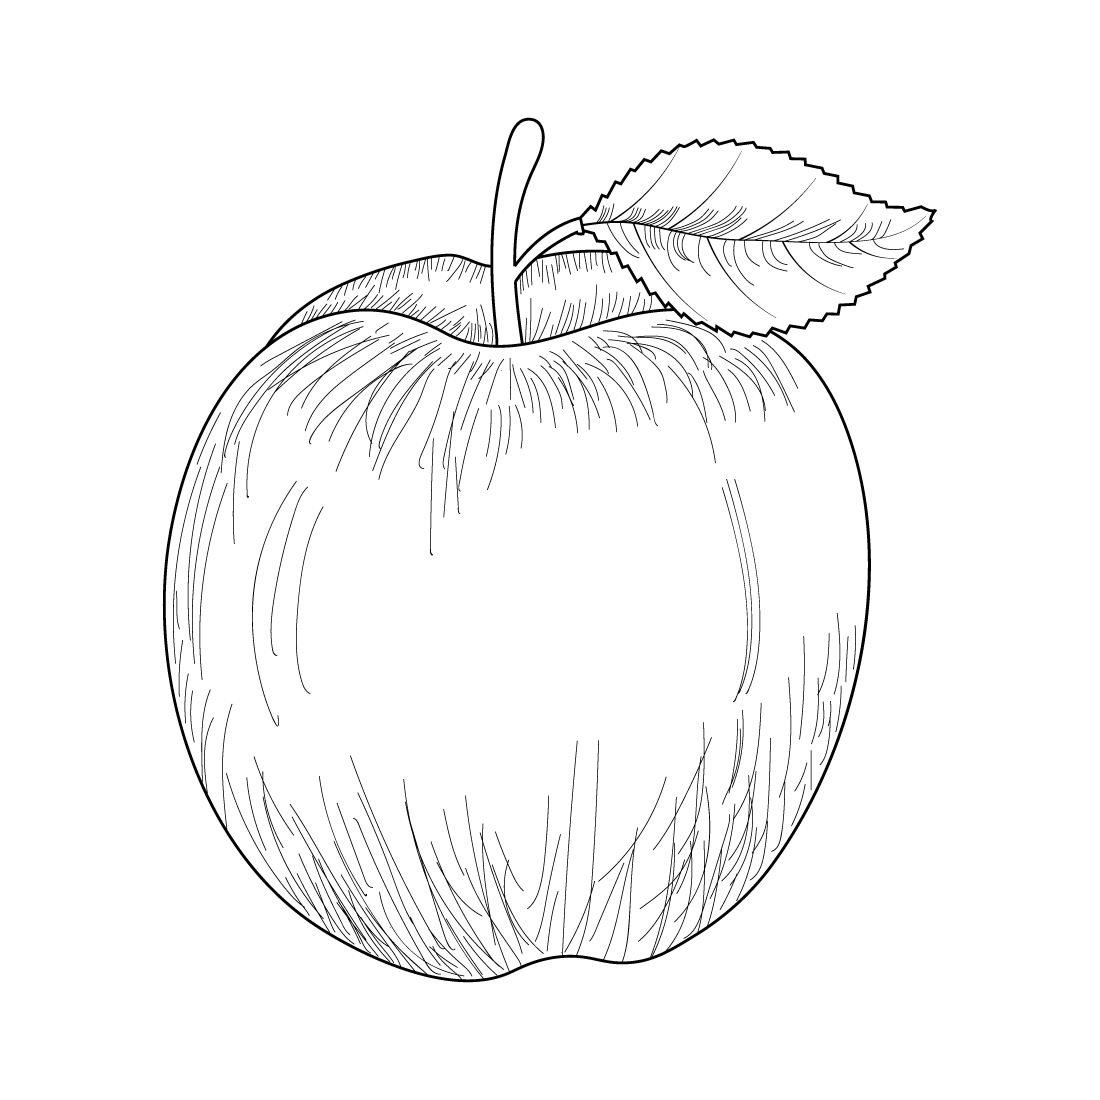 Apple continuous line drawing black and white Vector Image